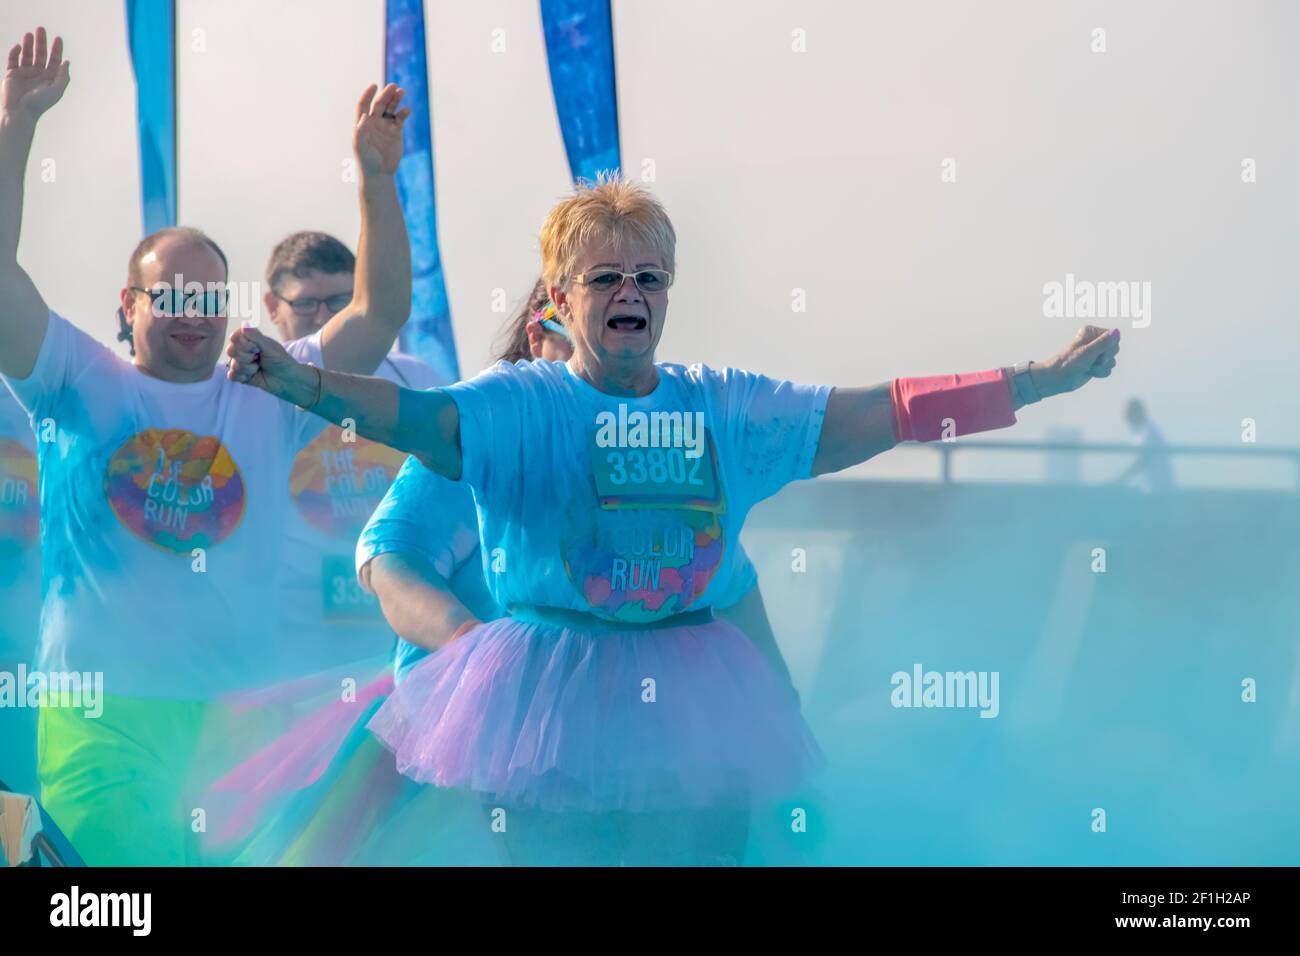 4 - 6 - 2019 -Tulsa USA Two runners - on a senior citizen woman in a tutu and a man behind her - hold their arms up as they run through colored powder Stock Photo